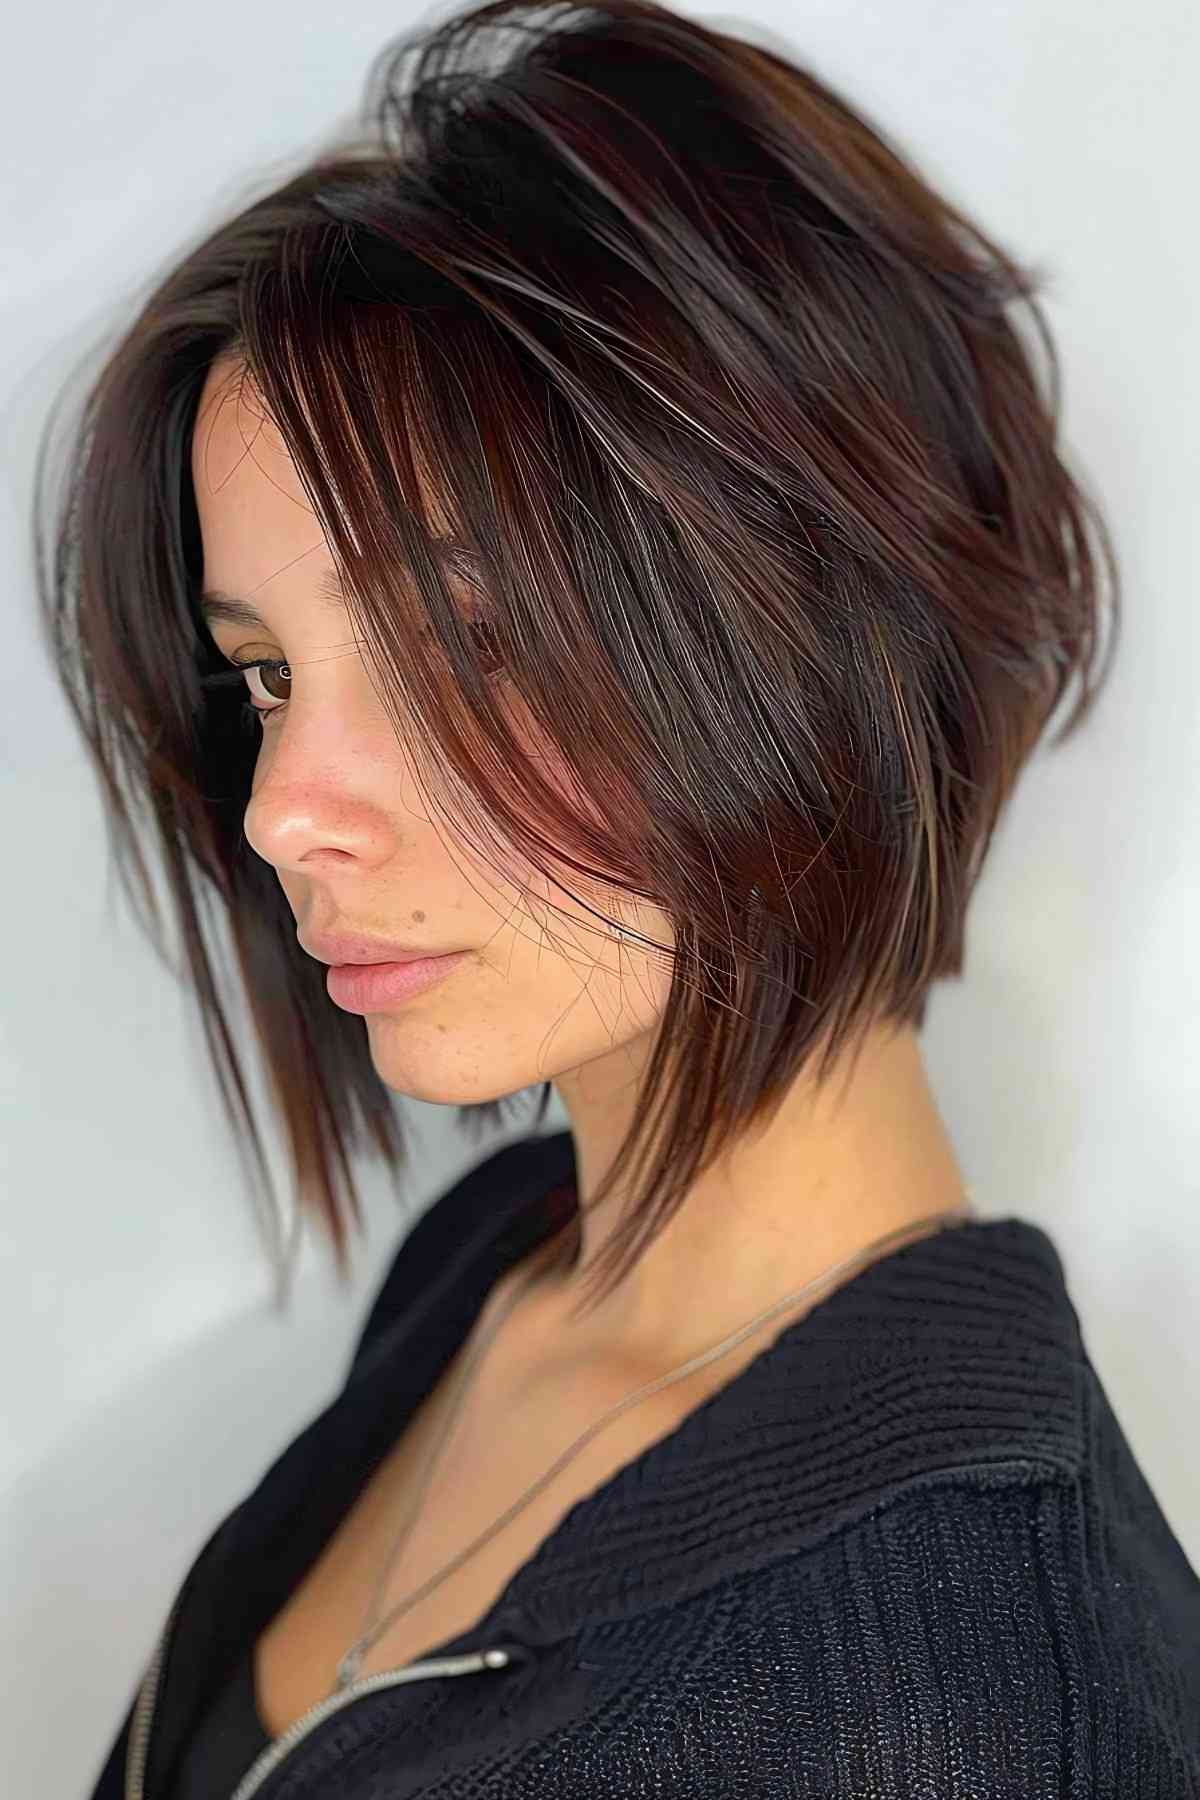 Experiment with Brown Highlights on Dark Hair